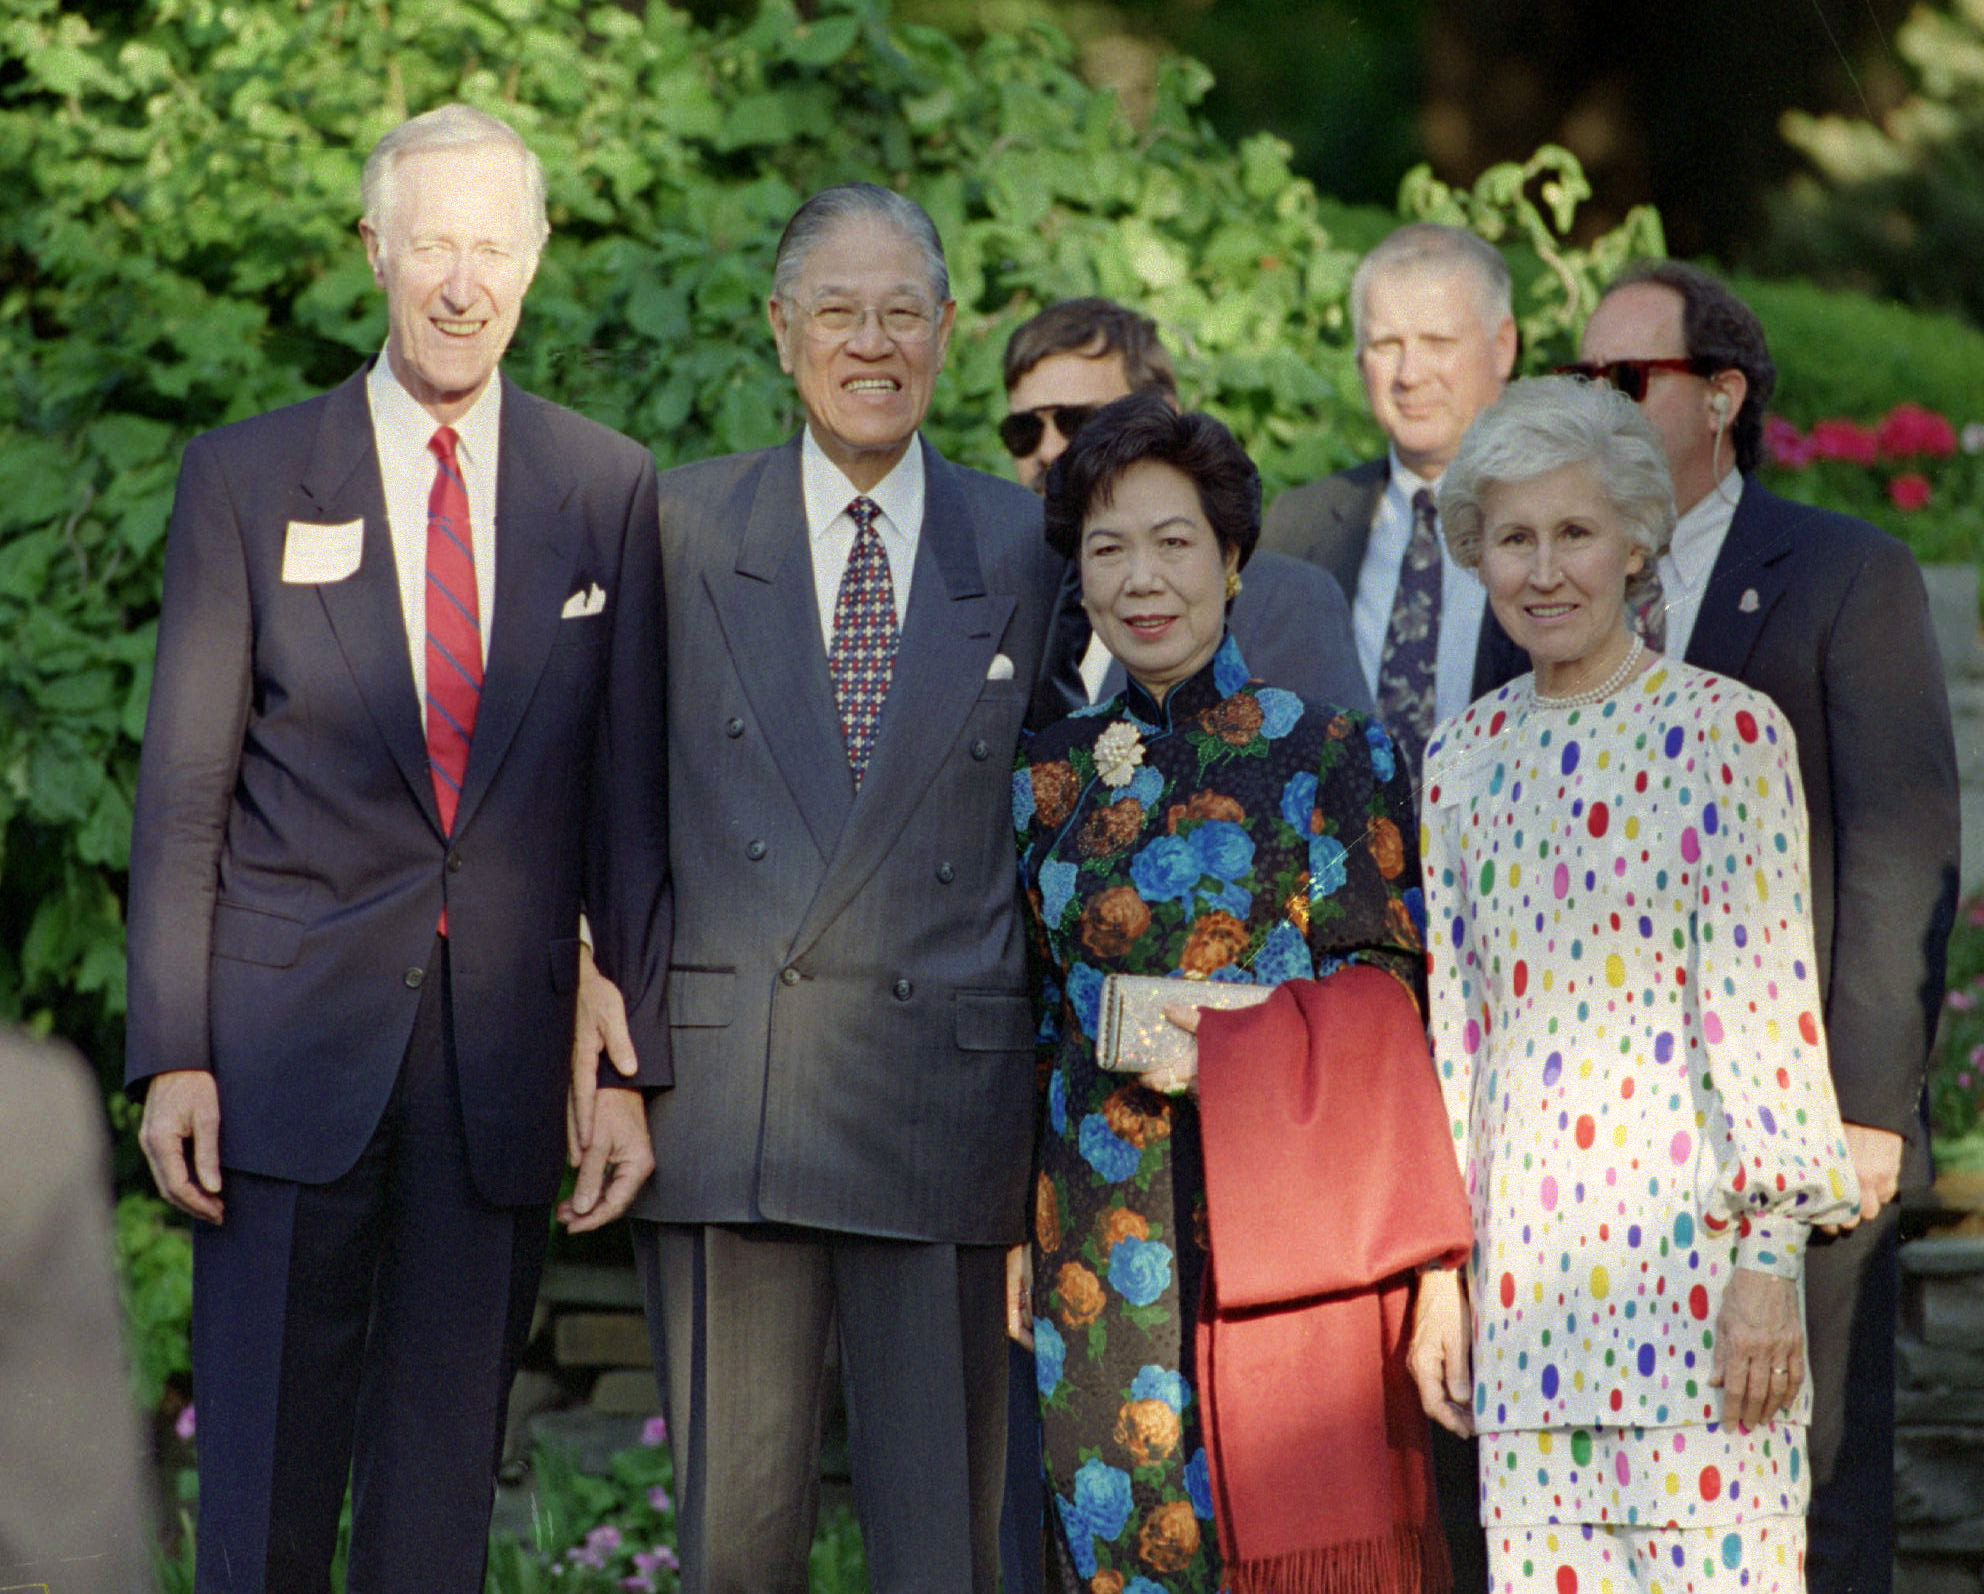 Cornell University President Frank Rhodes and Taiwan President Lee Teng-hui pose with their wives, Lee Wen-hui and Rosa Rhodes prior to a private dinner at the president's home on June 10,1995 in Ithaca, New York.